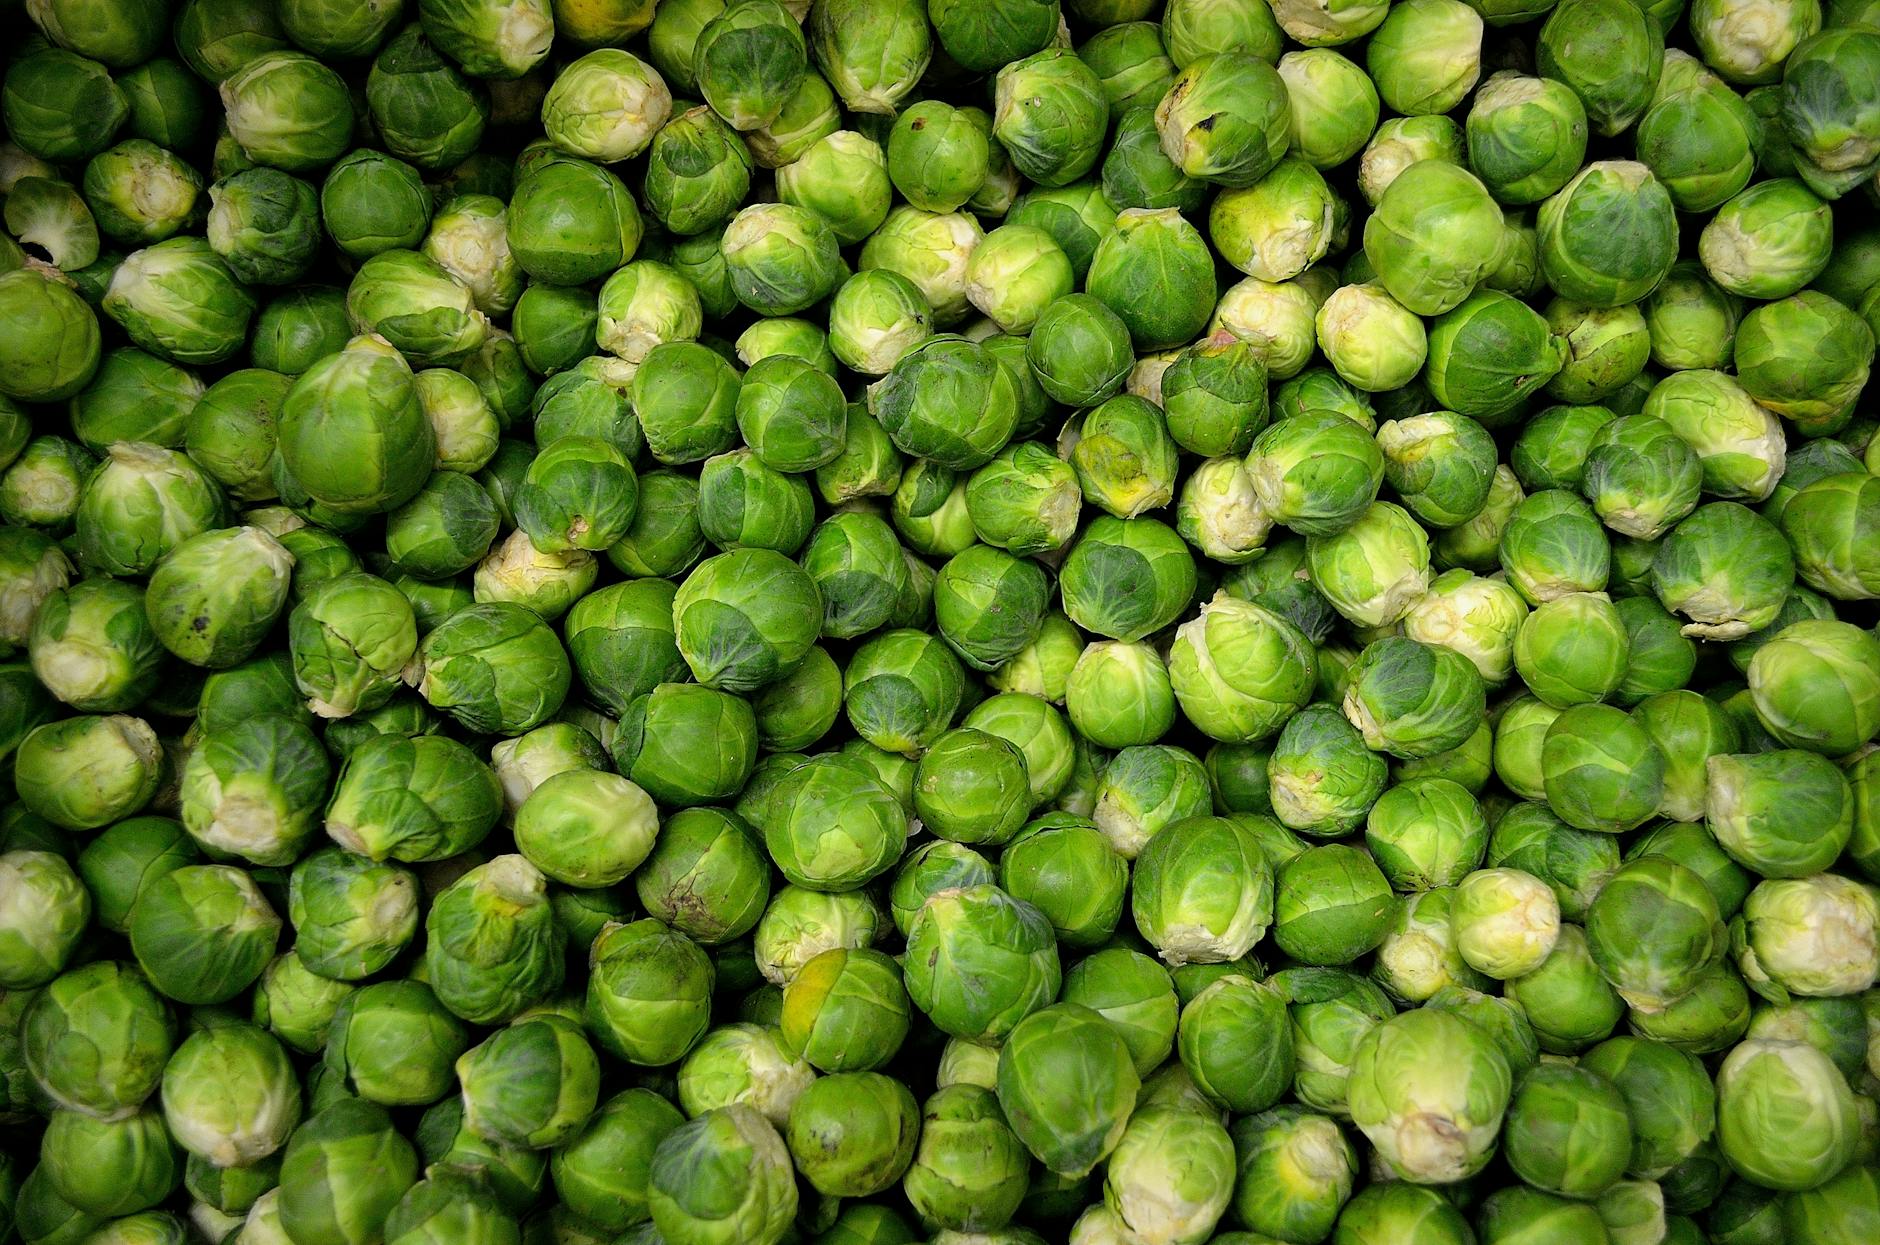 Brussels Sprouts Ready For Harvest | How To Grow Brussels Sprouts From Seeds | Garden Season Ideas